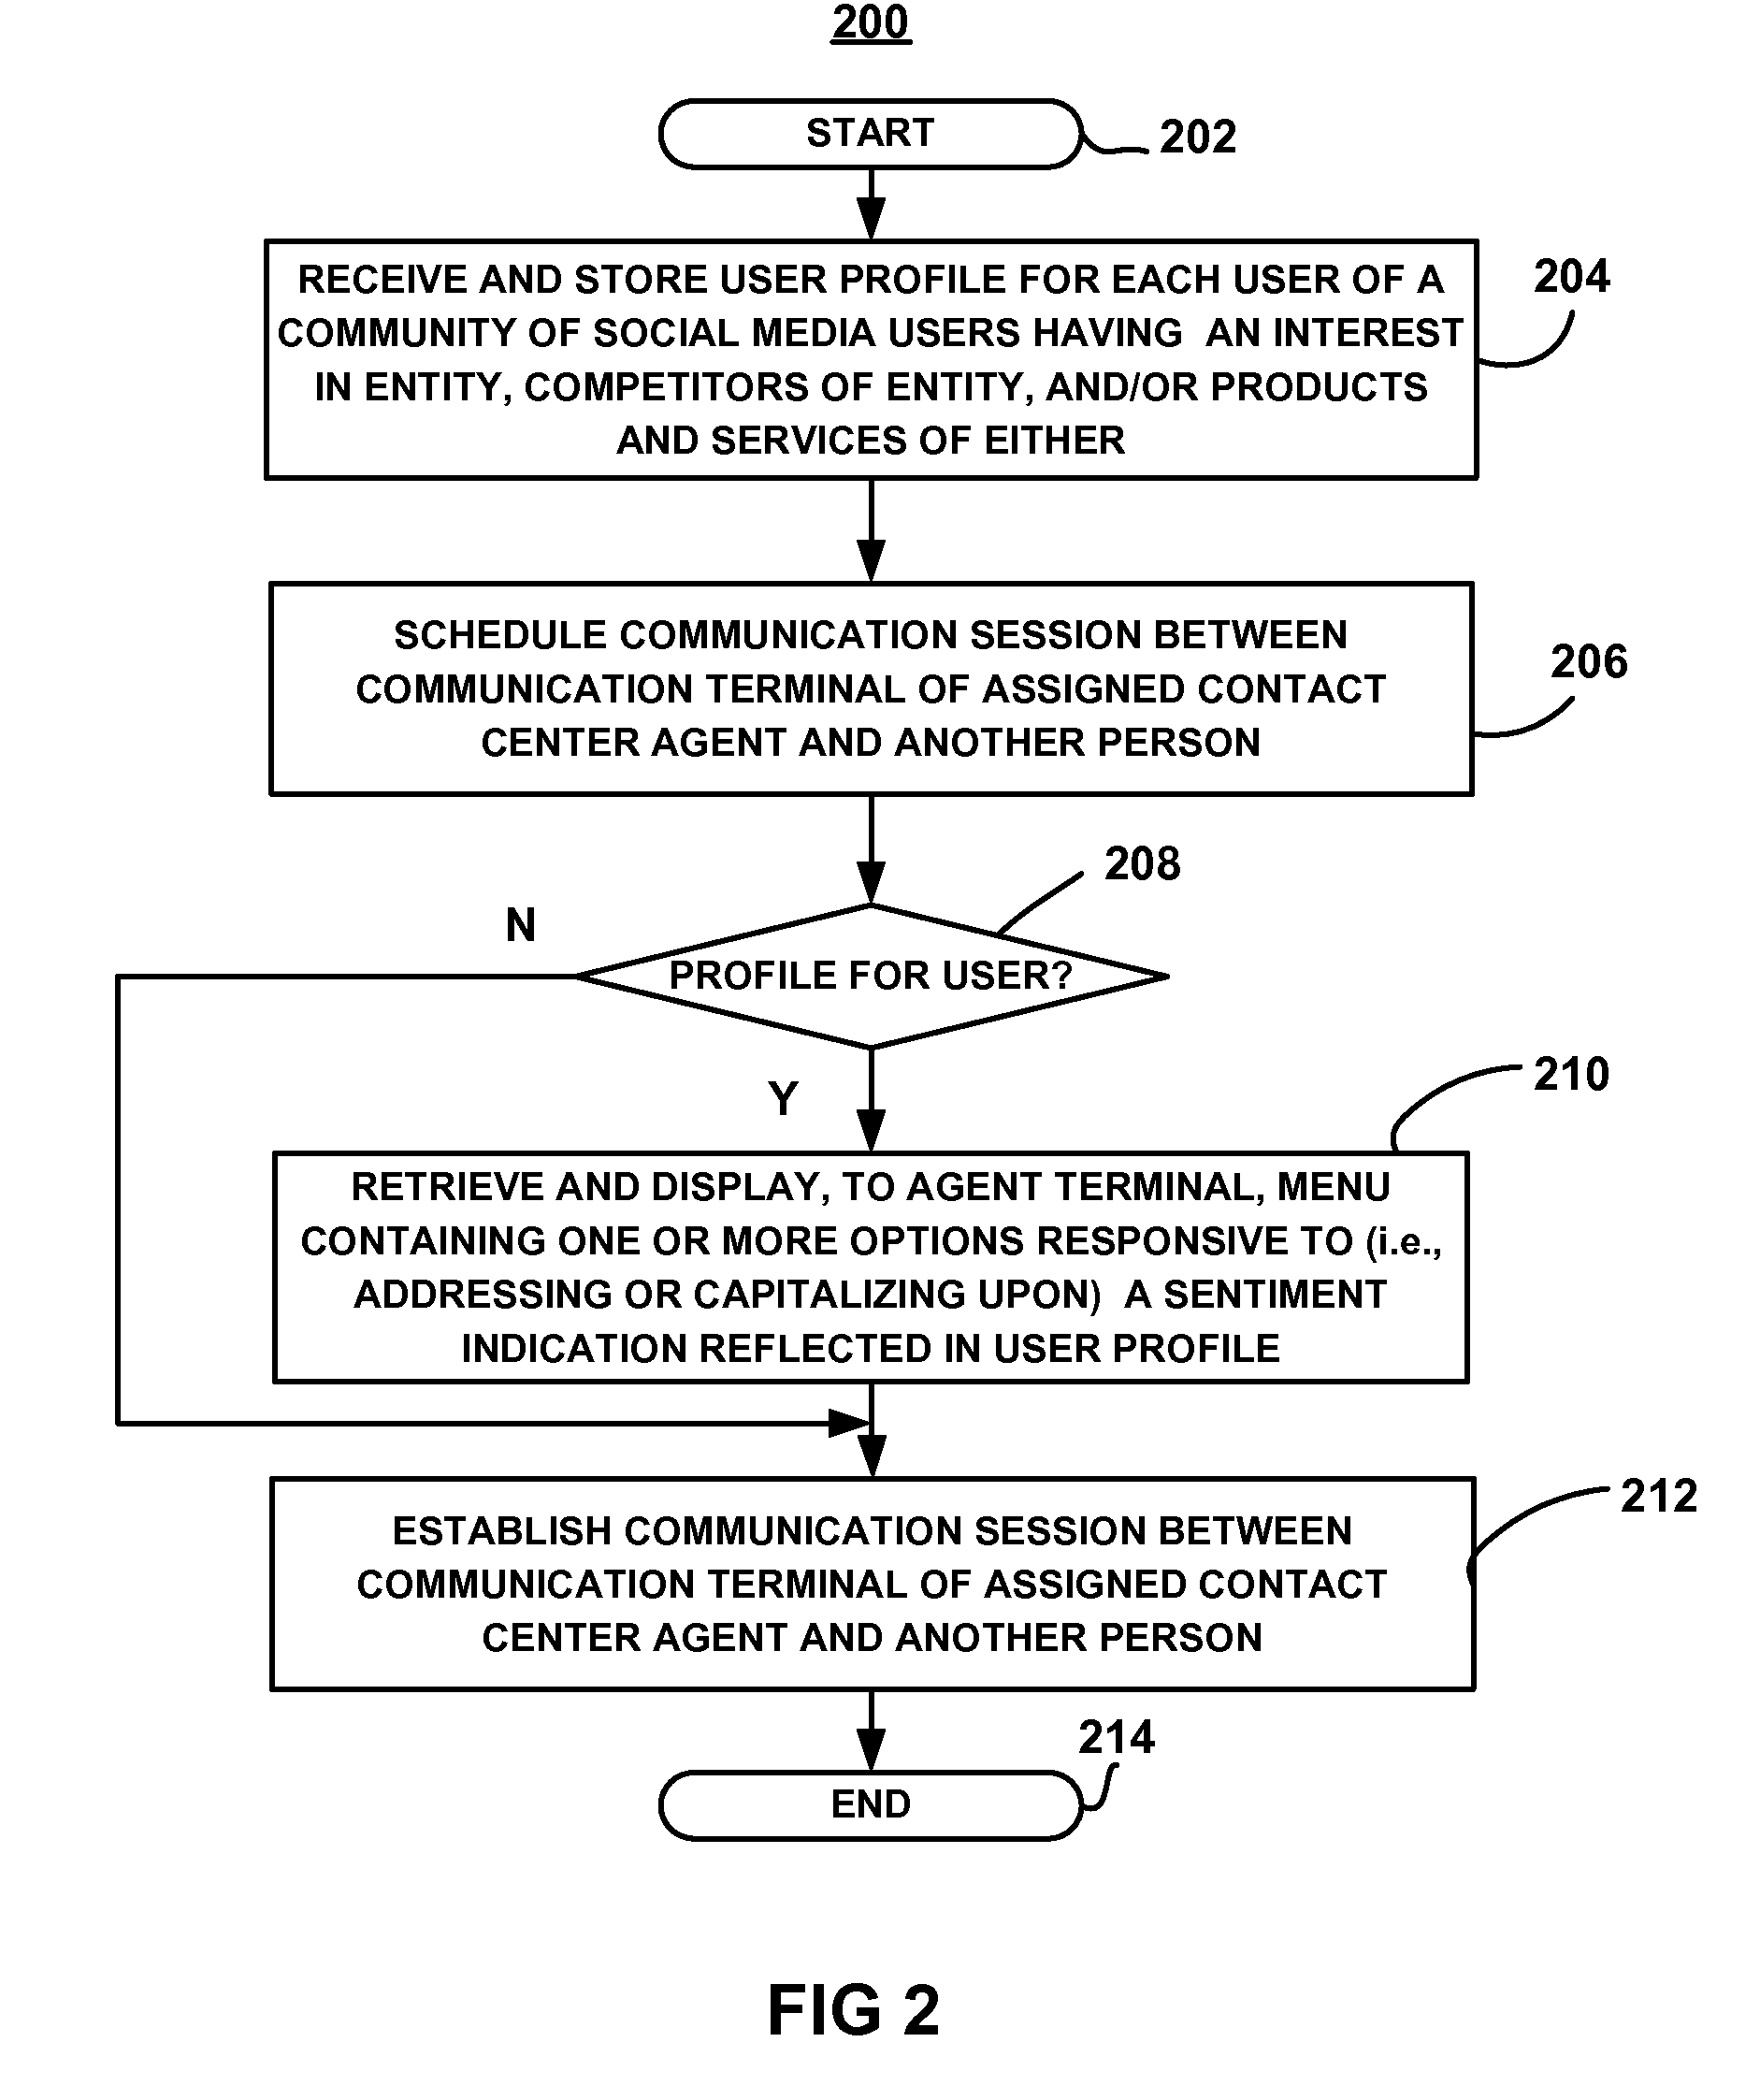 Systems and methods for influencing customer treatment in a contact center through detection and analysis of social media activity